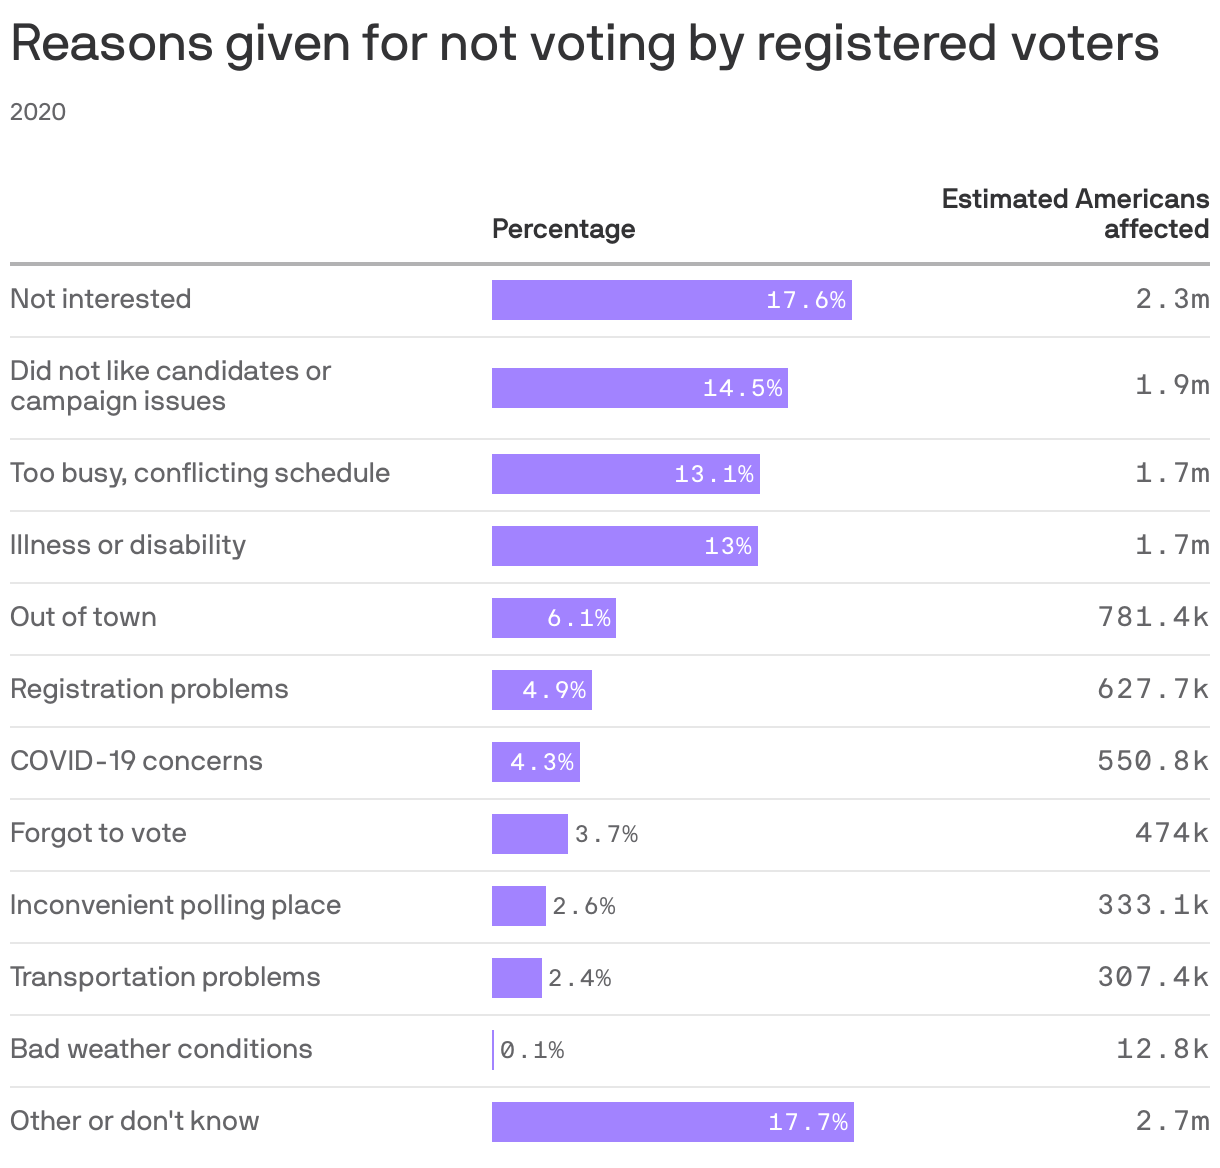 Reasons given for not voting by registered voters